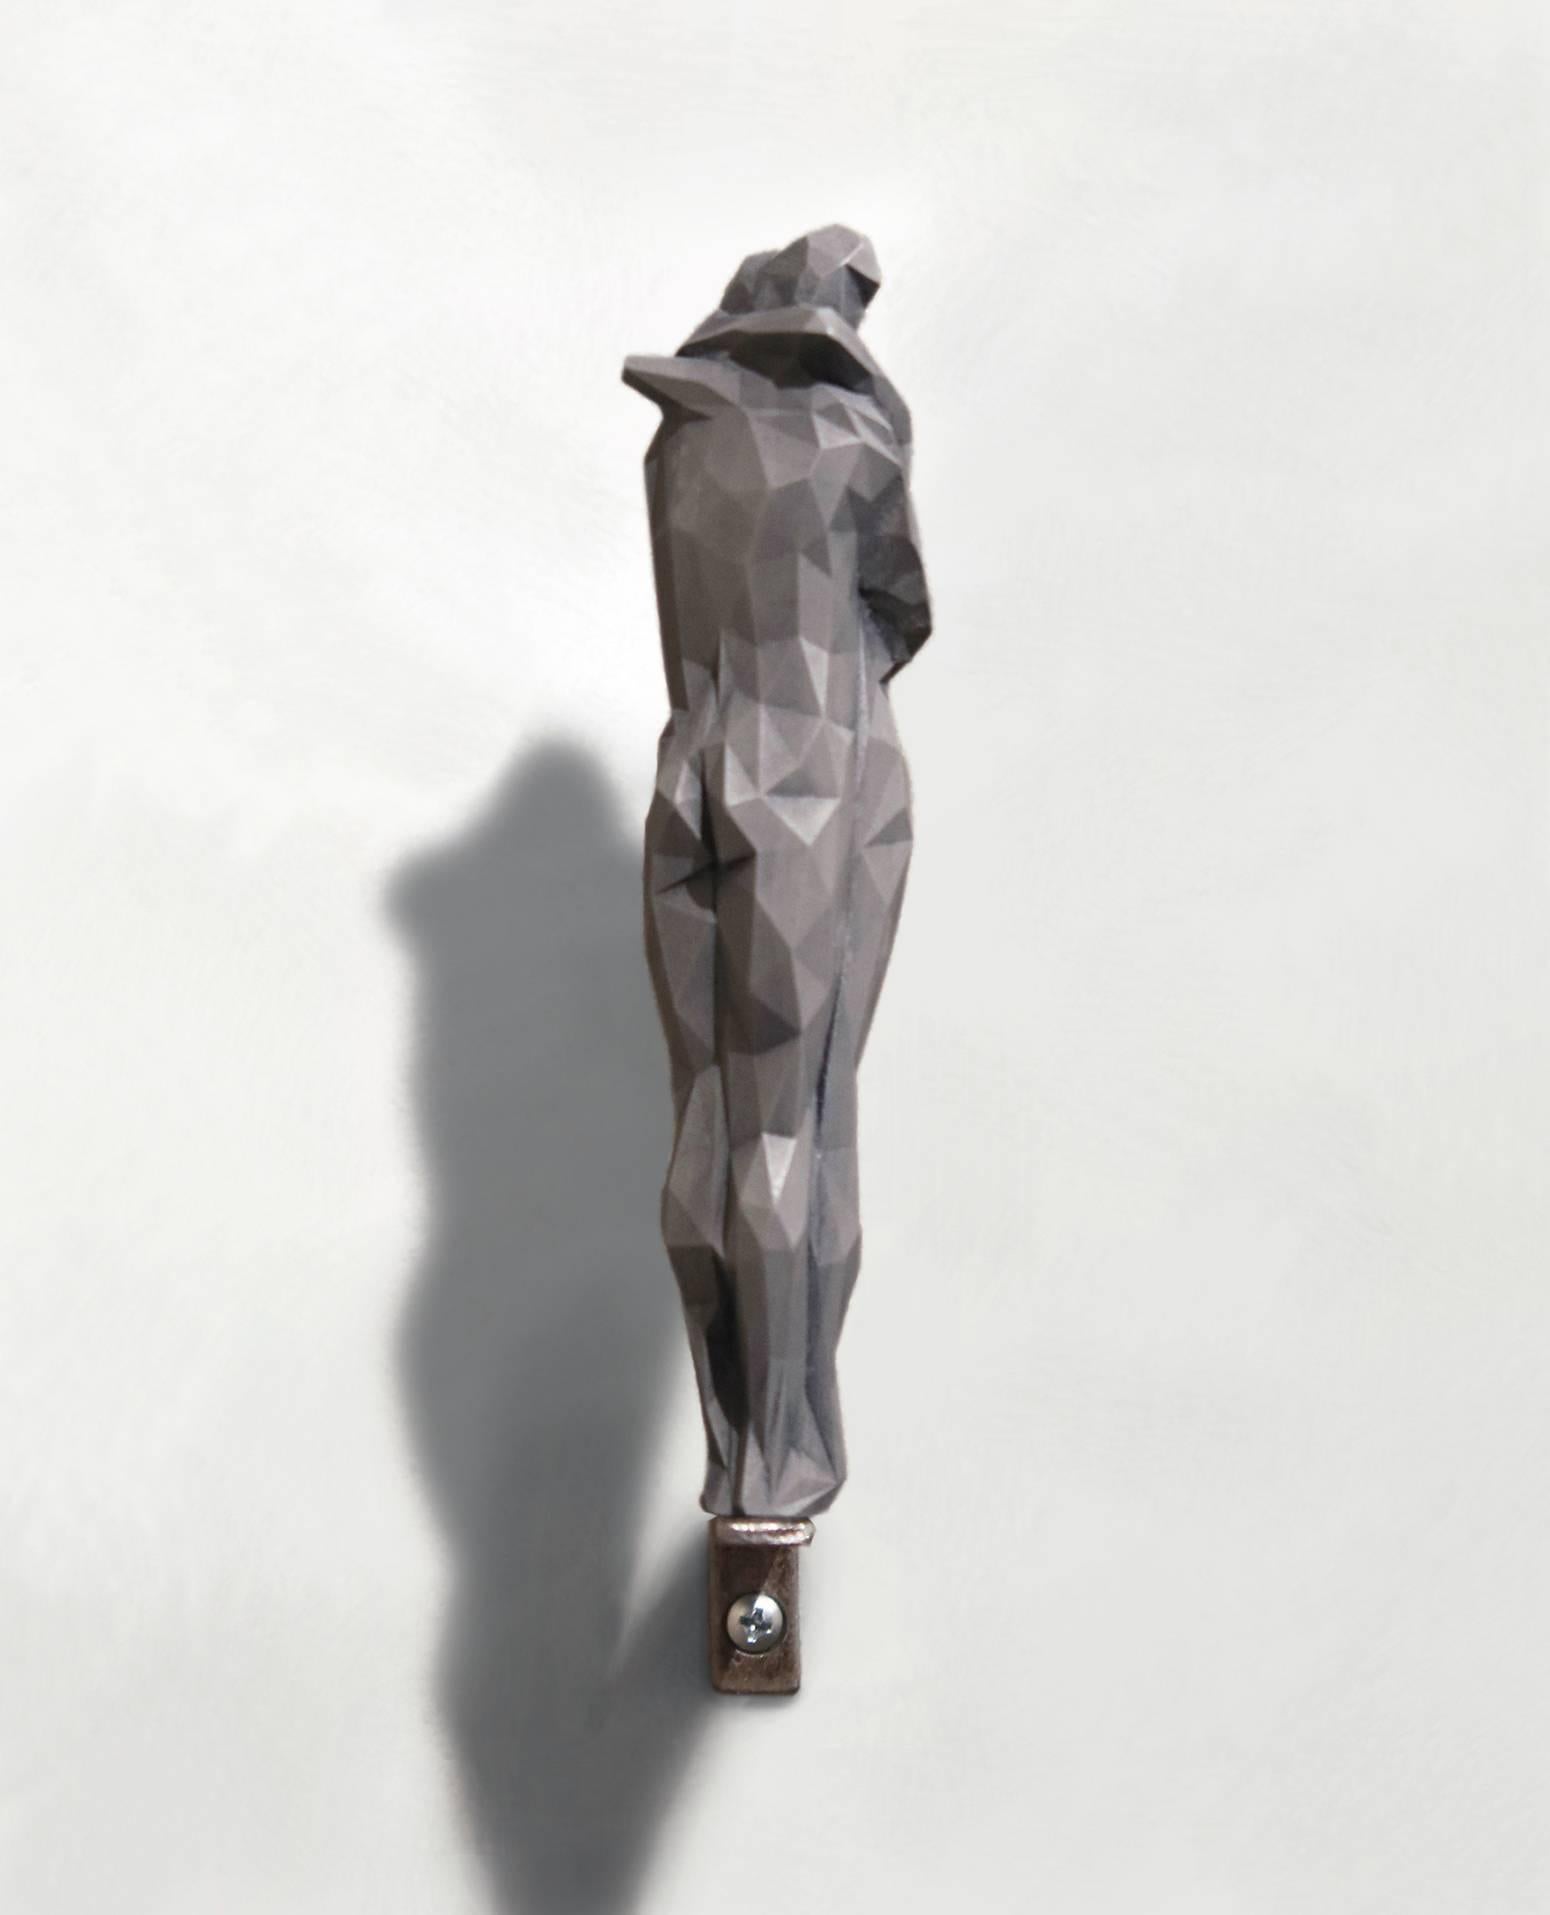 LOVE2014 - Contemporary Sculpture by Emil Alzamora